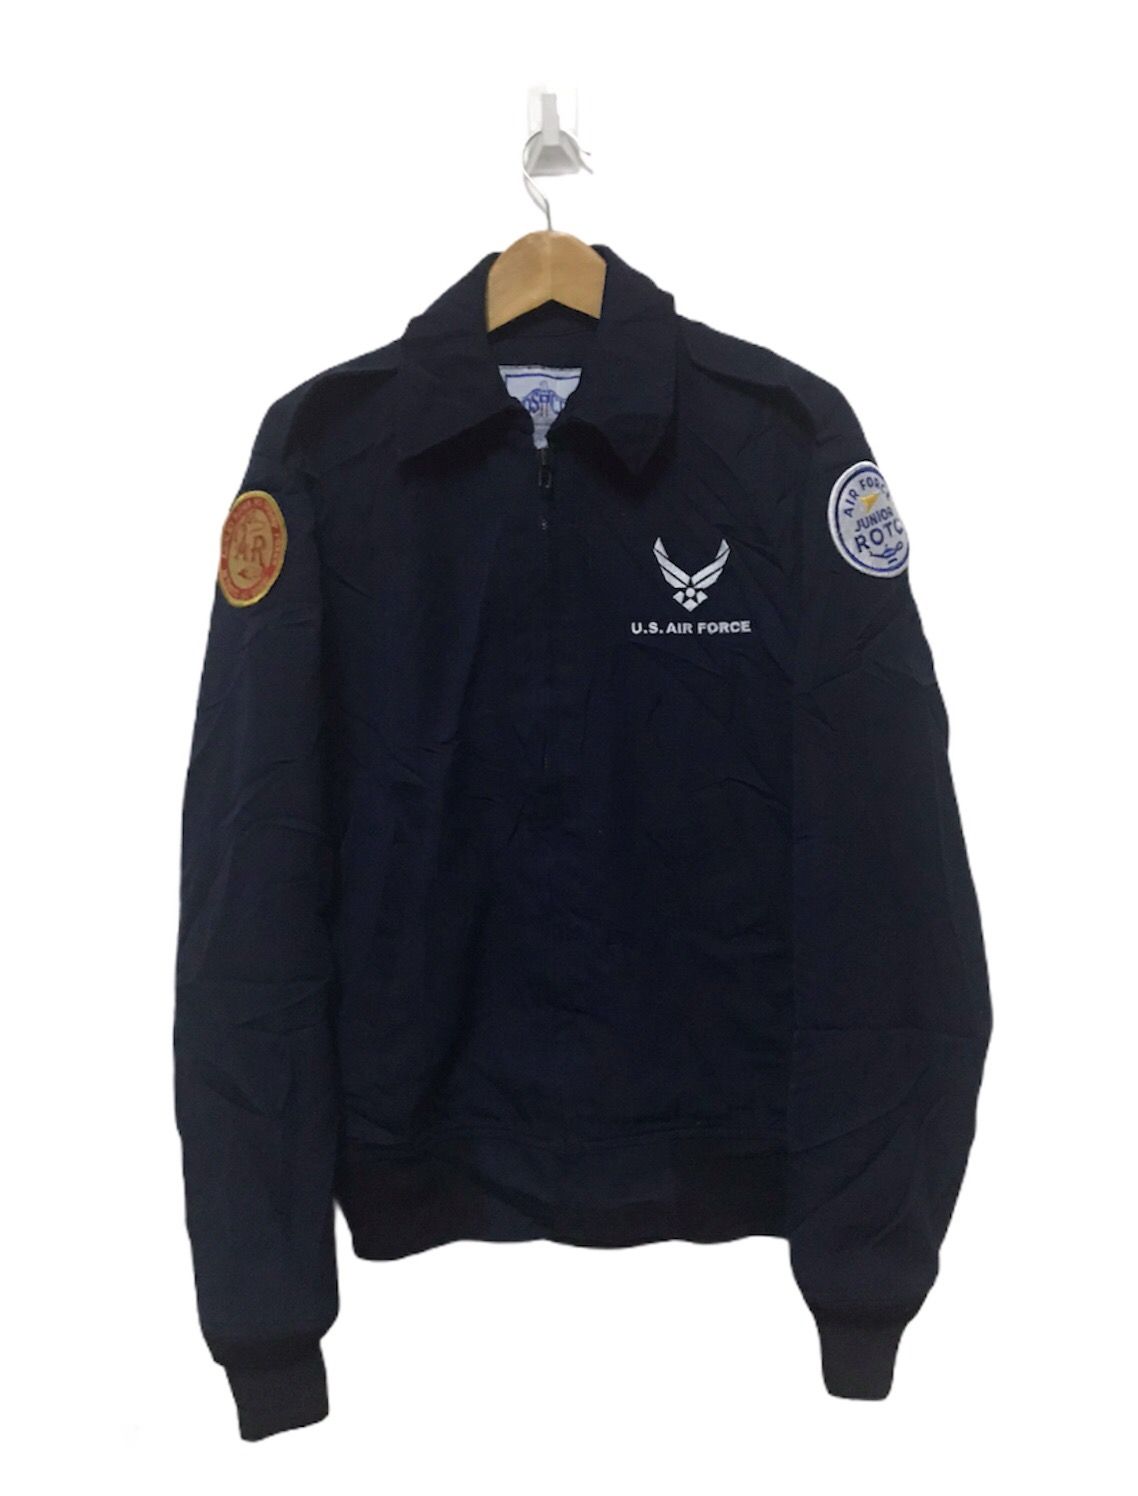 Military Us Air Force jacket | Grailed